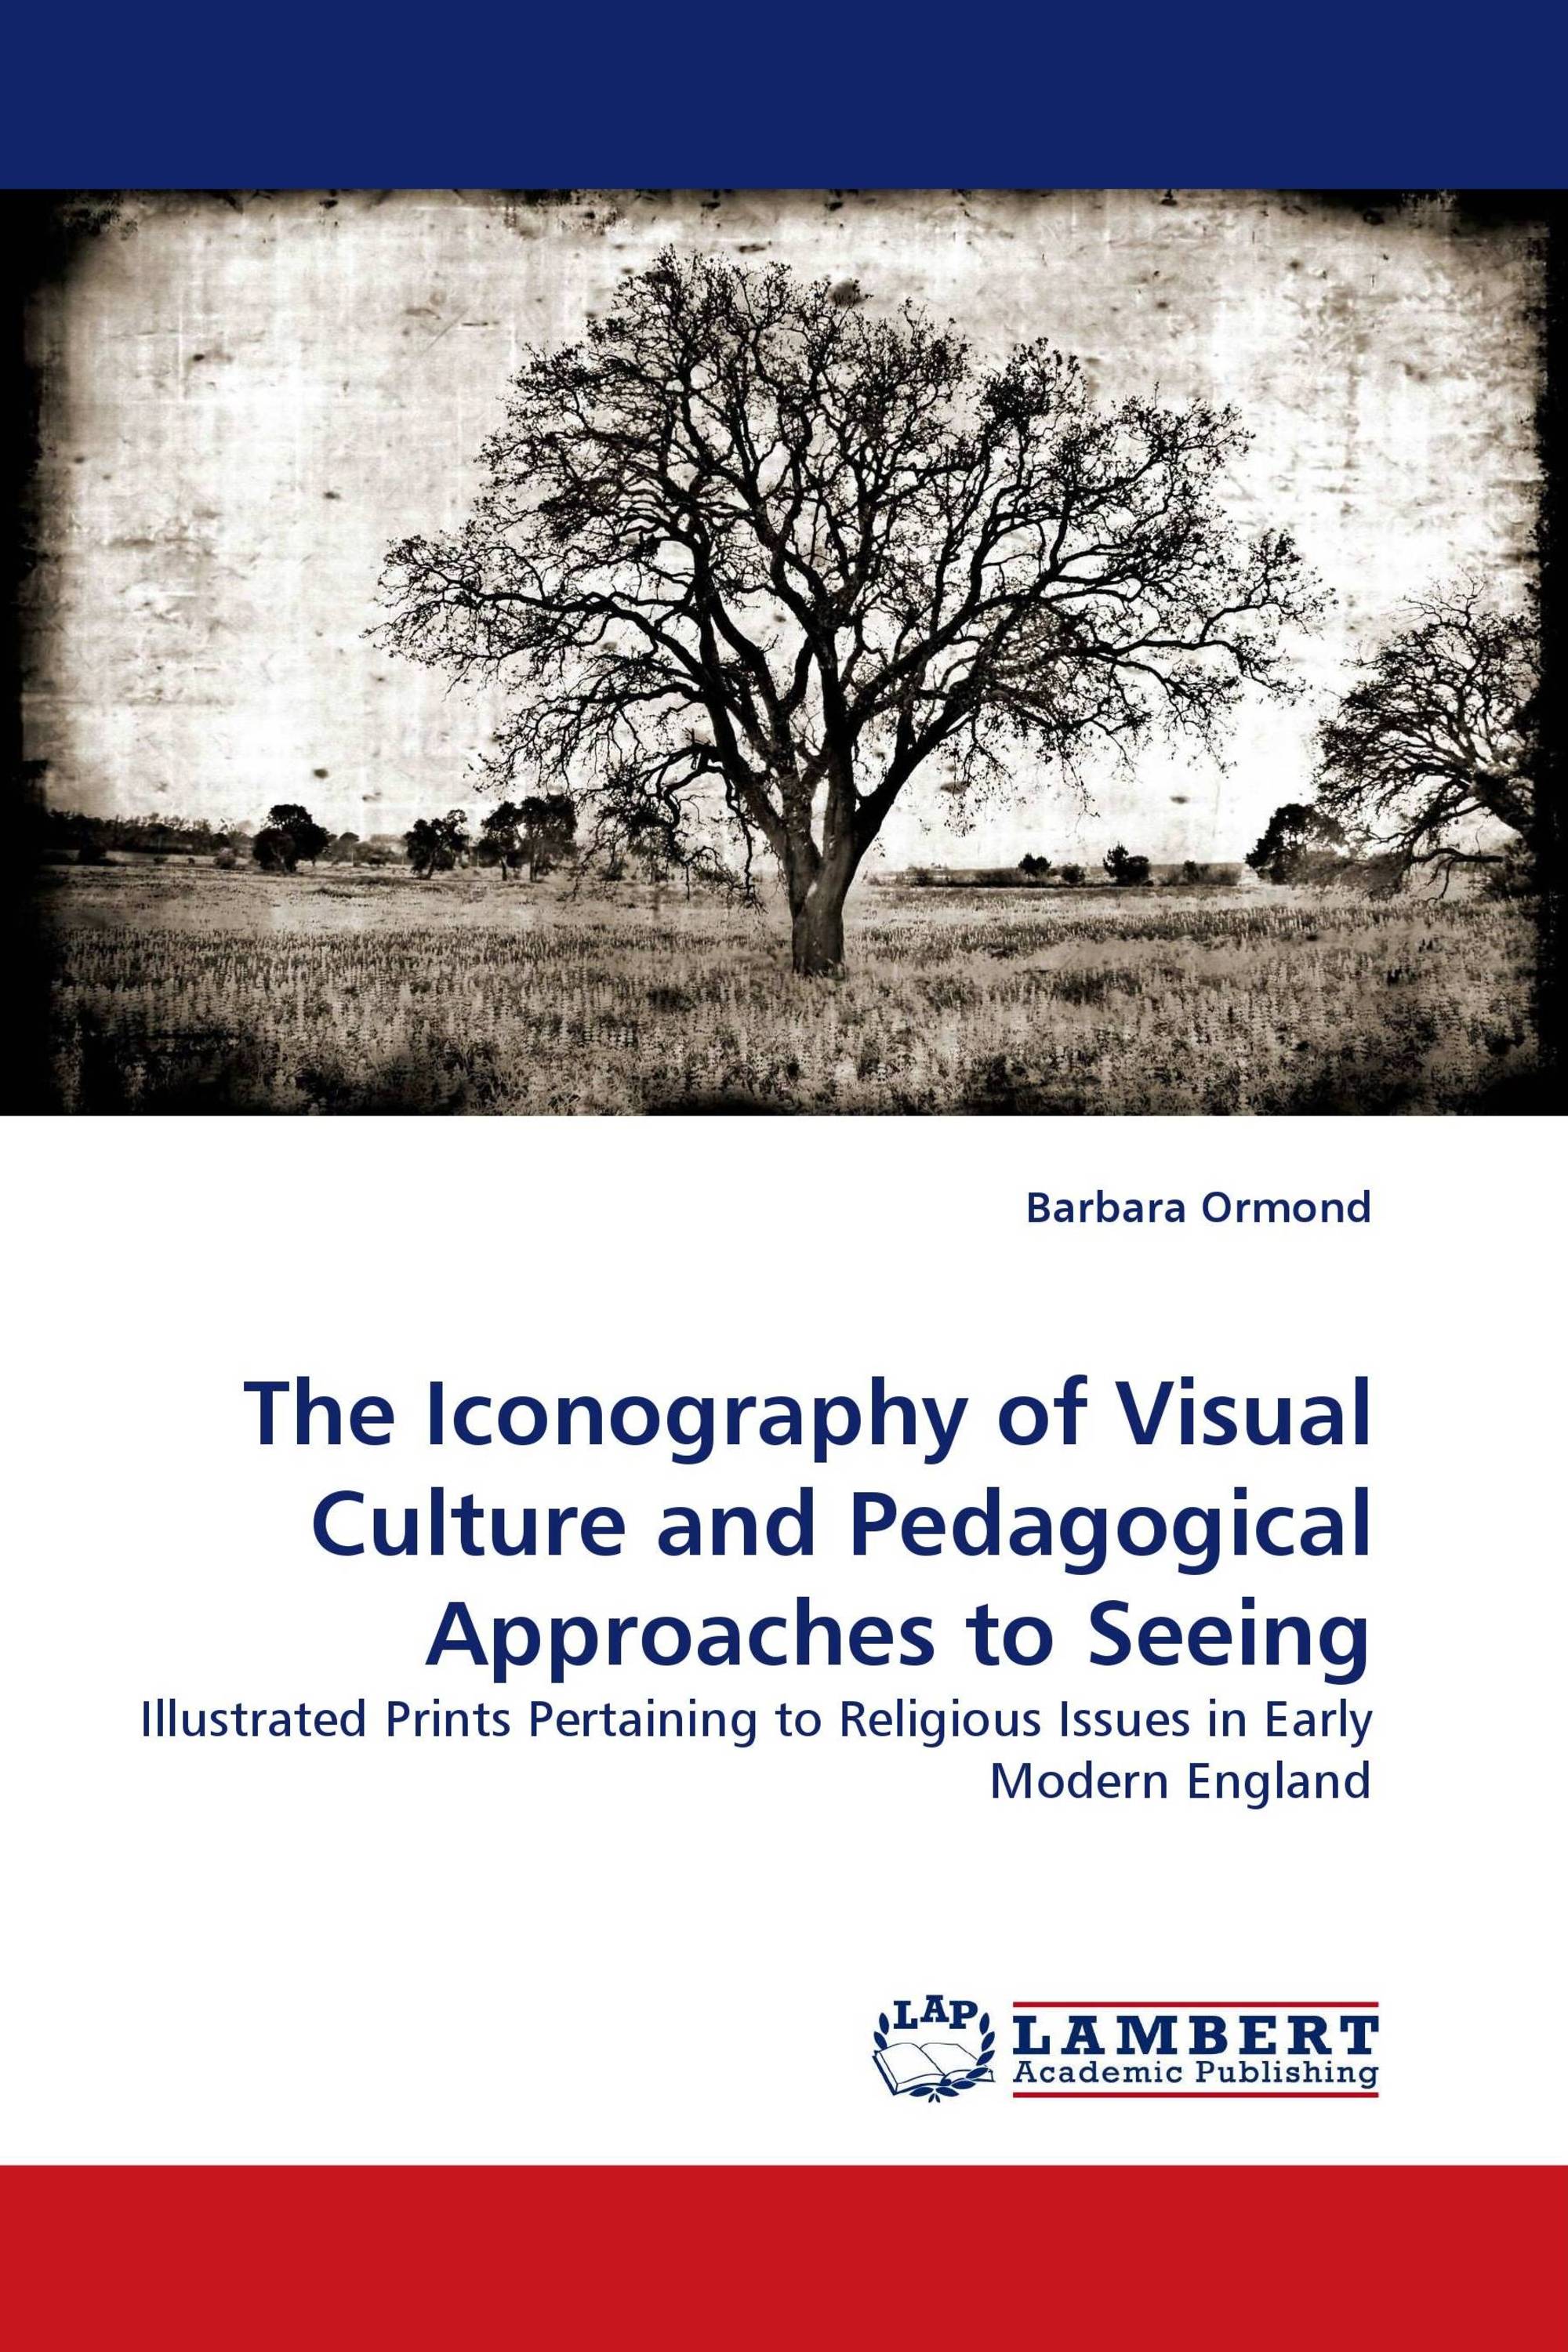 The Iconography of Visual Culture and Pedagogical Approaches to Seeing